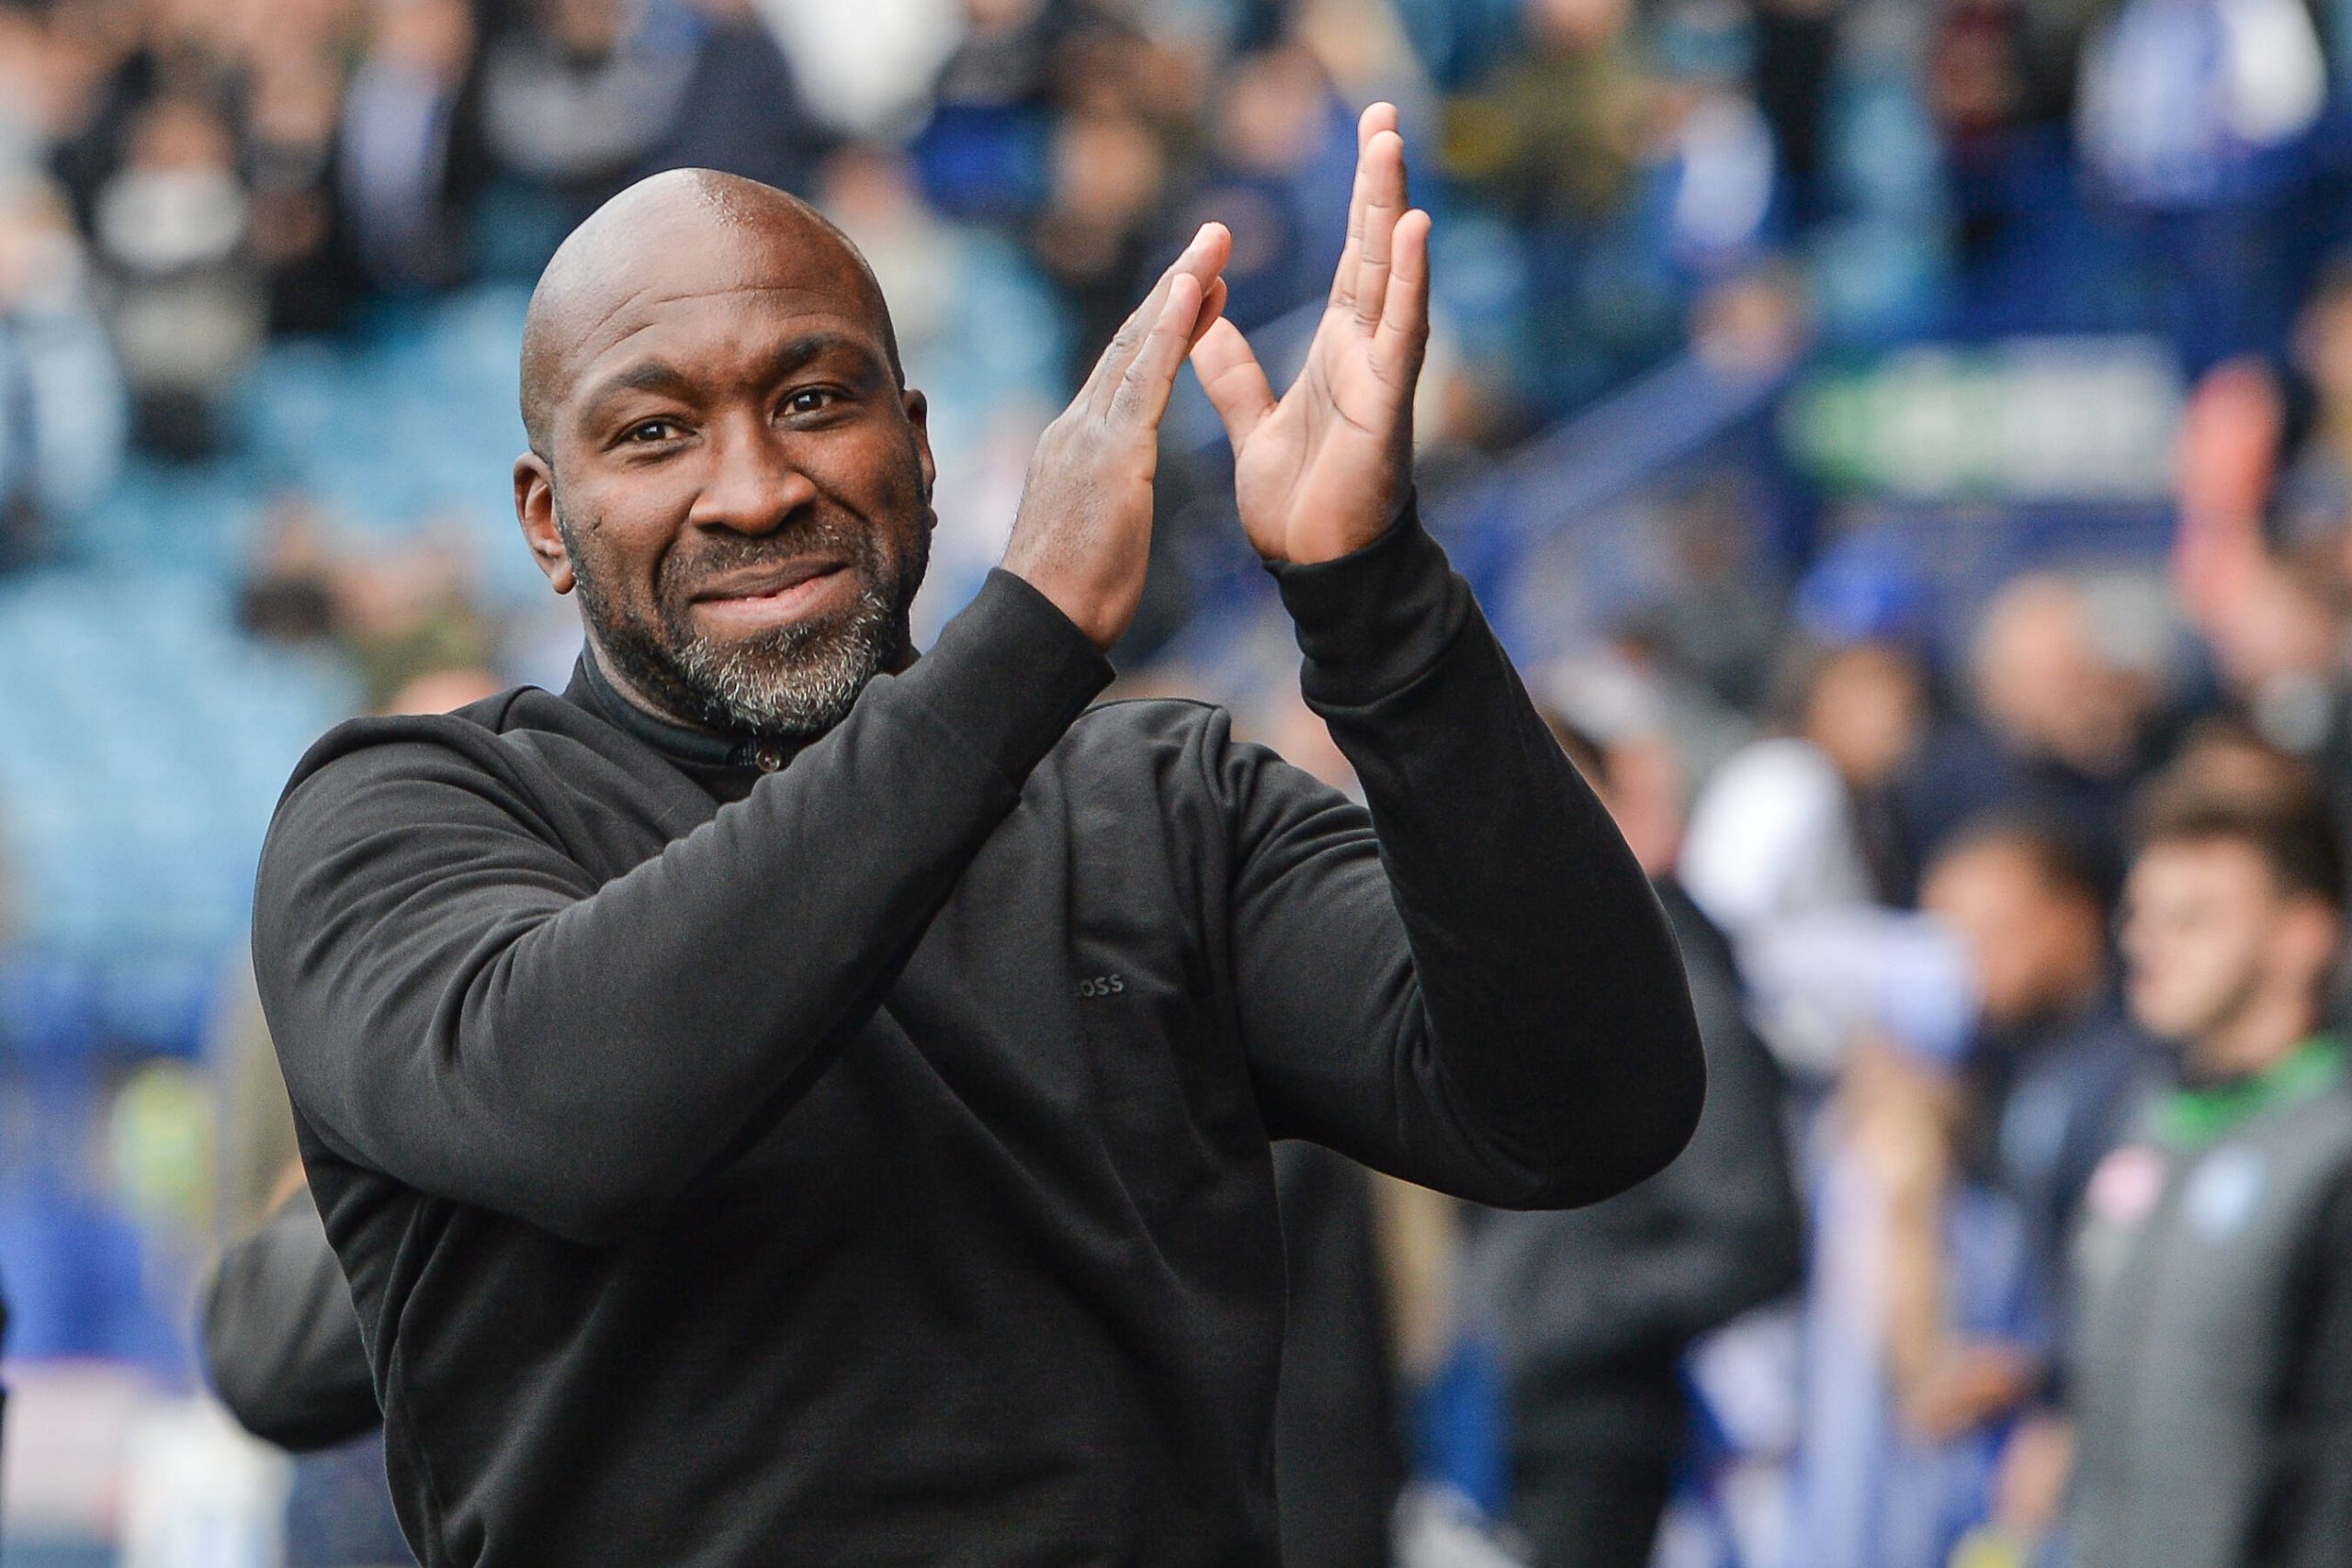 Sheffield Wednesday manager Darren Moore during the Sky Bet League 1 match between Sheff Wednesday and Wycombe Wanderers